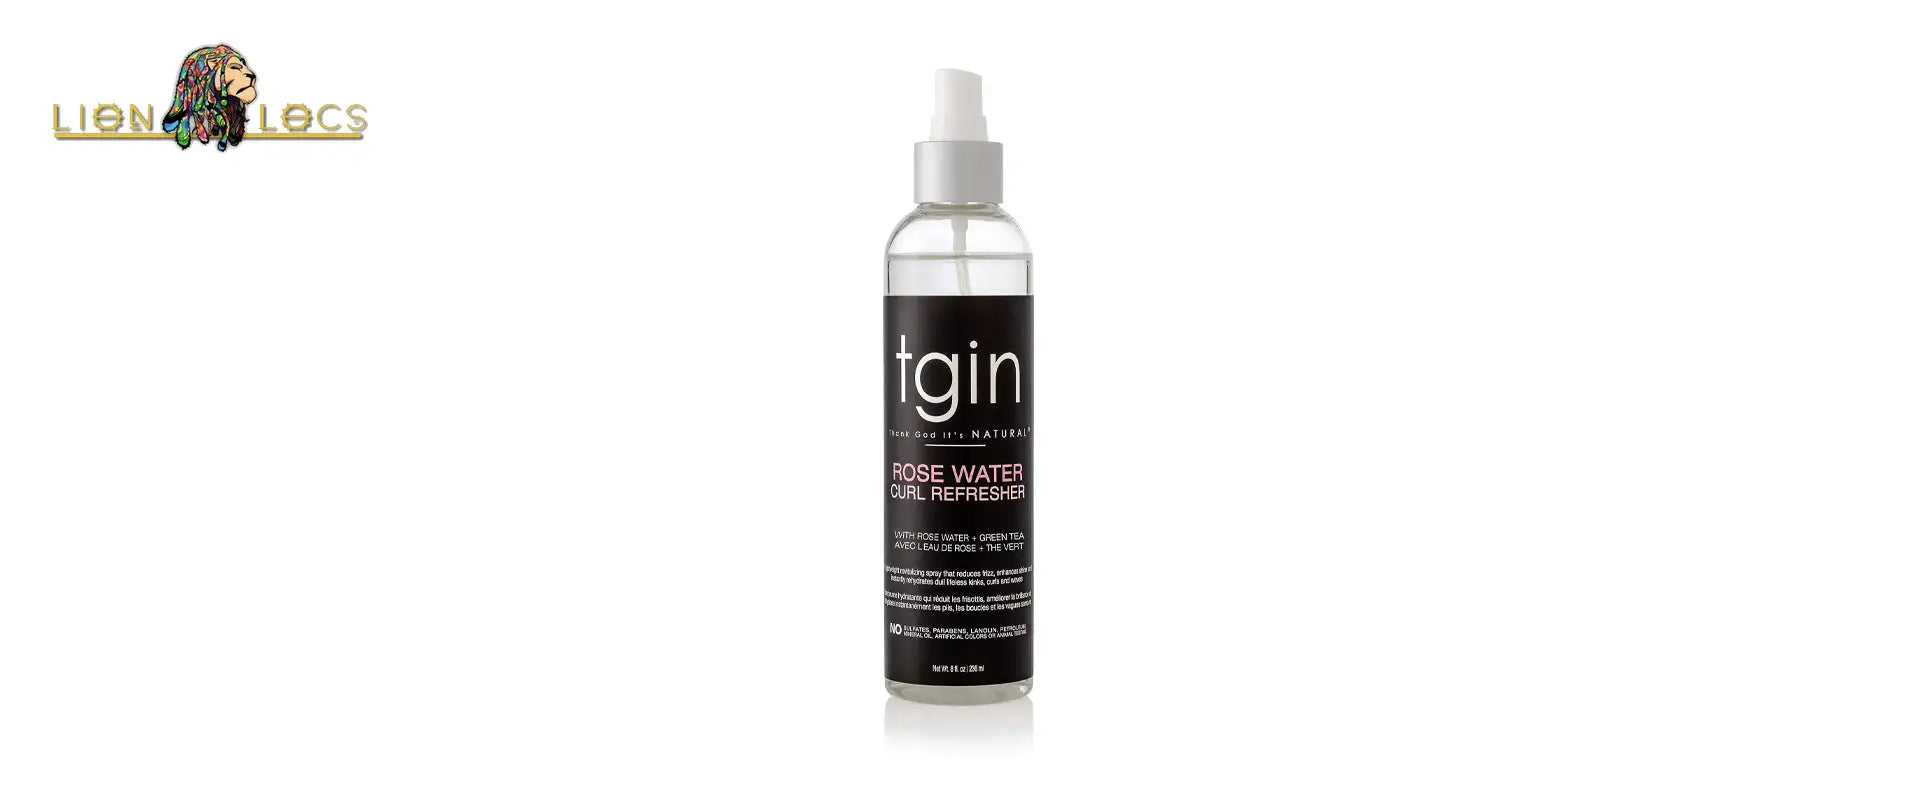 tgin Rose Water Curl Refresher Review